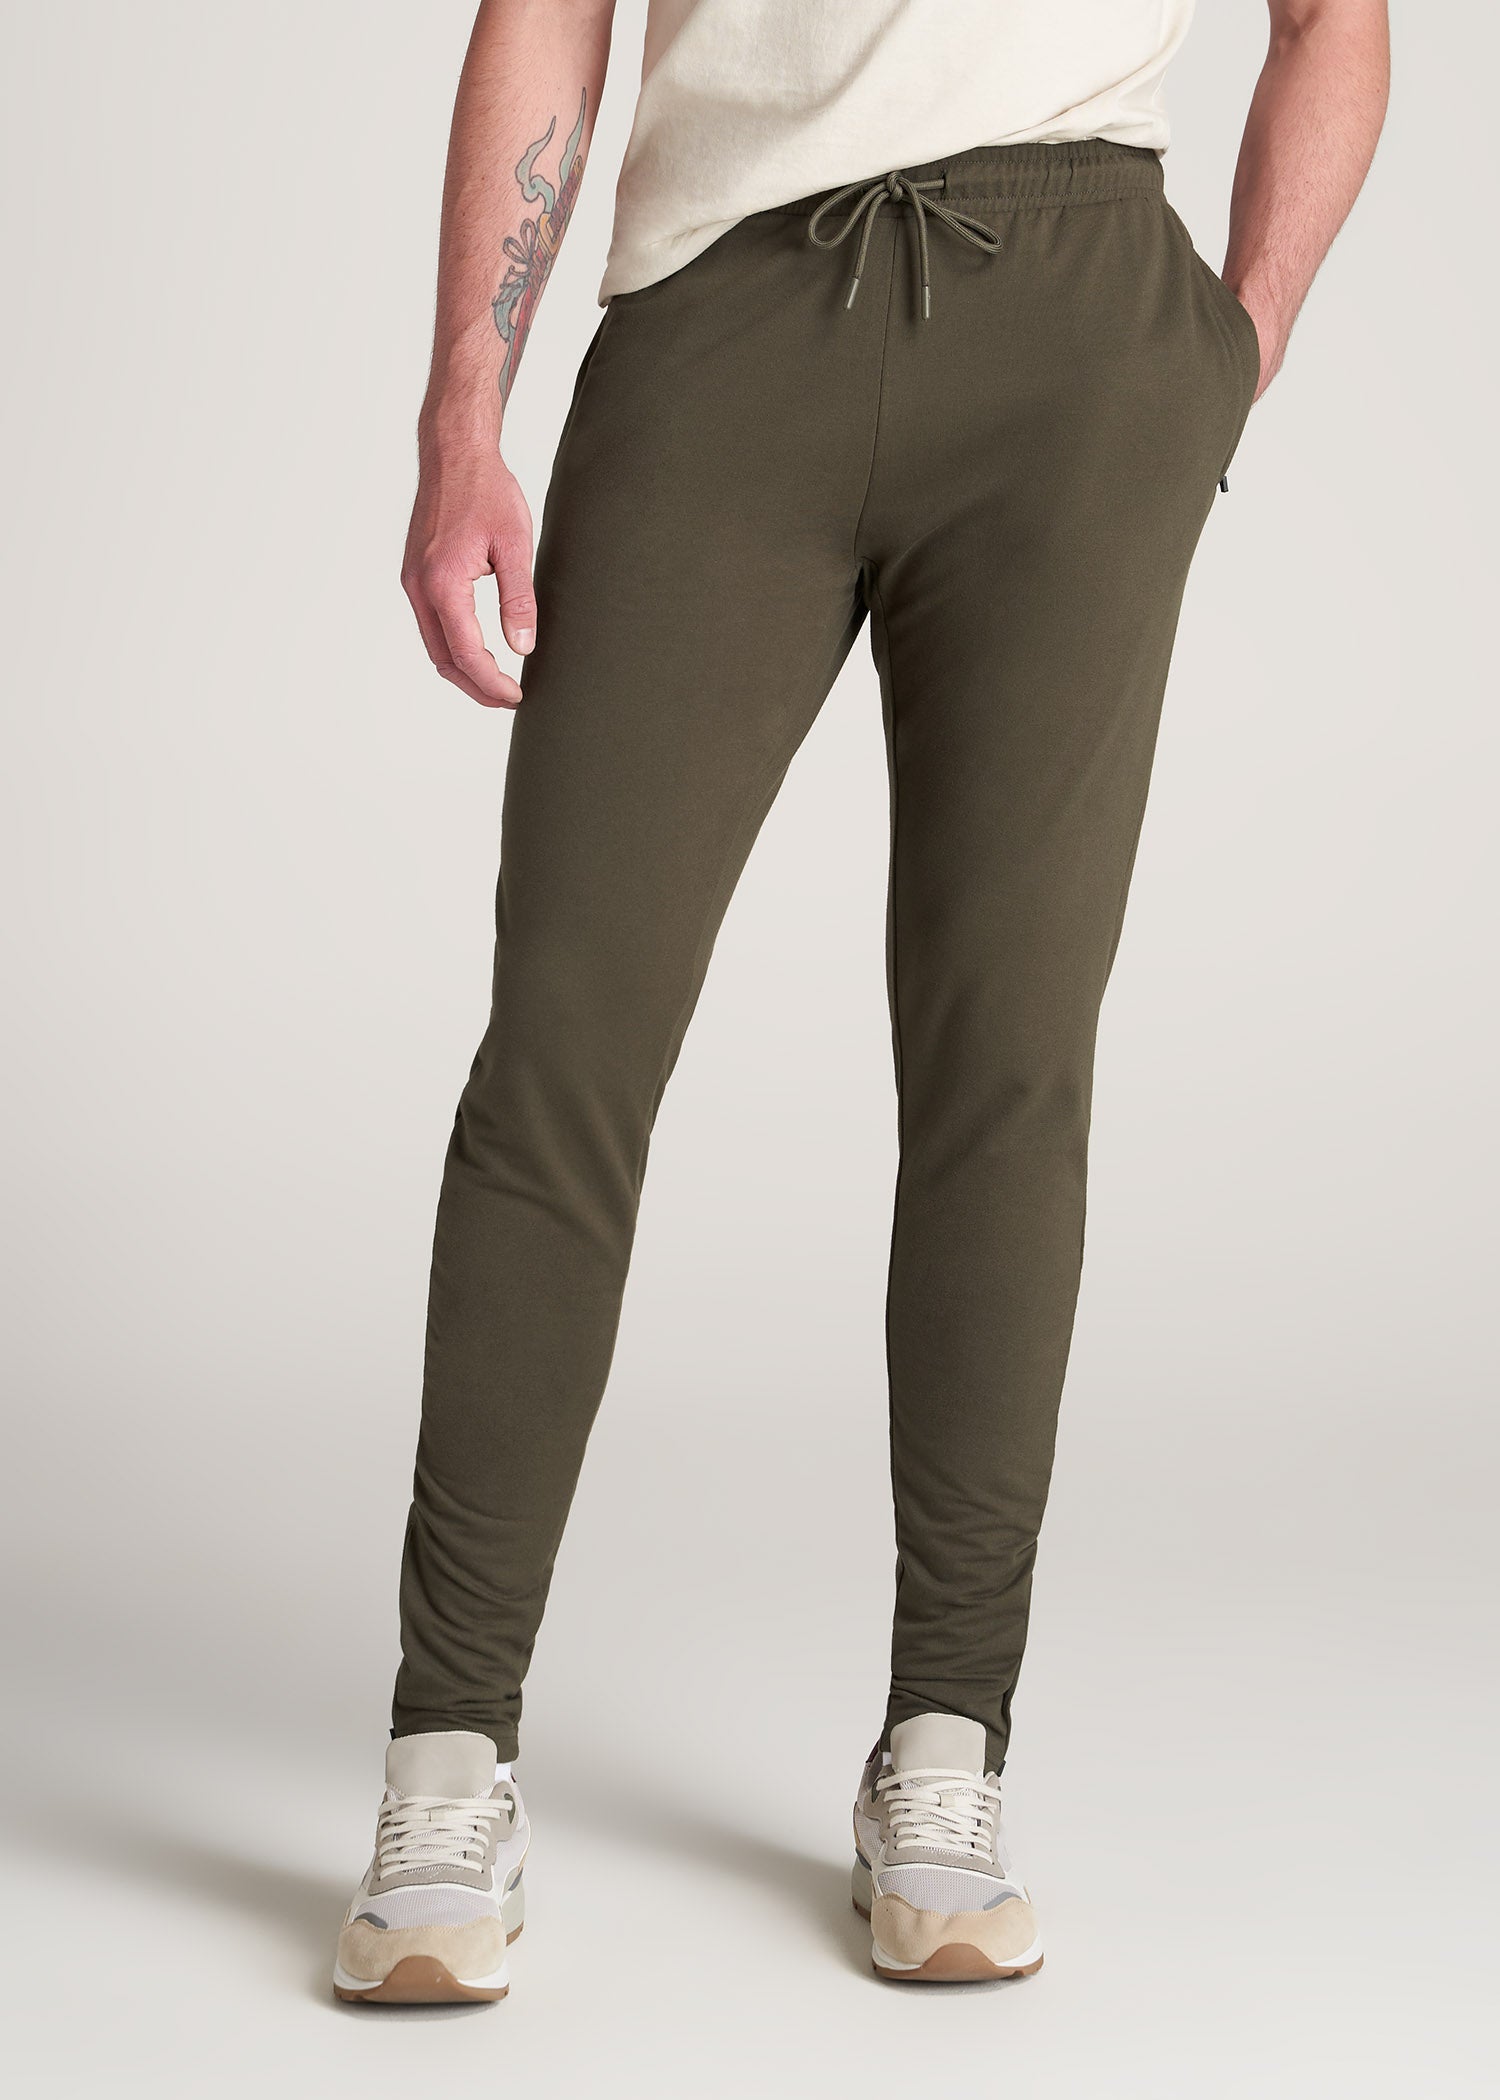       American-Tall-Men-Light-Weight-Tapered-French-Terry-Jogger-Camo-Green-front